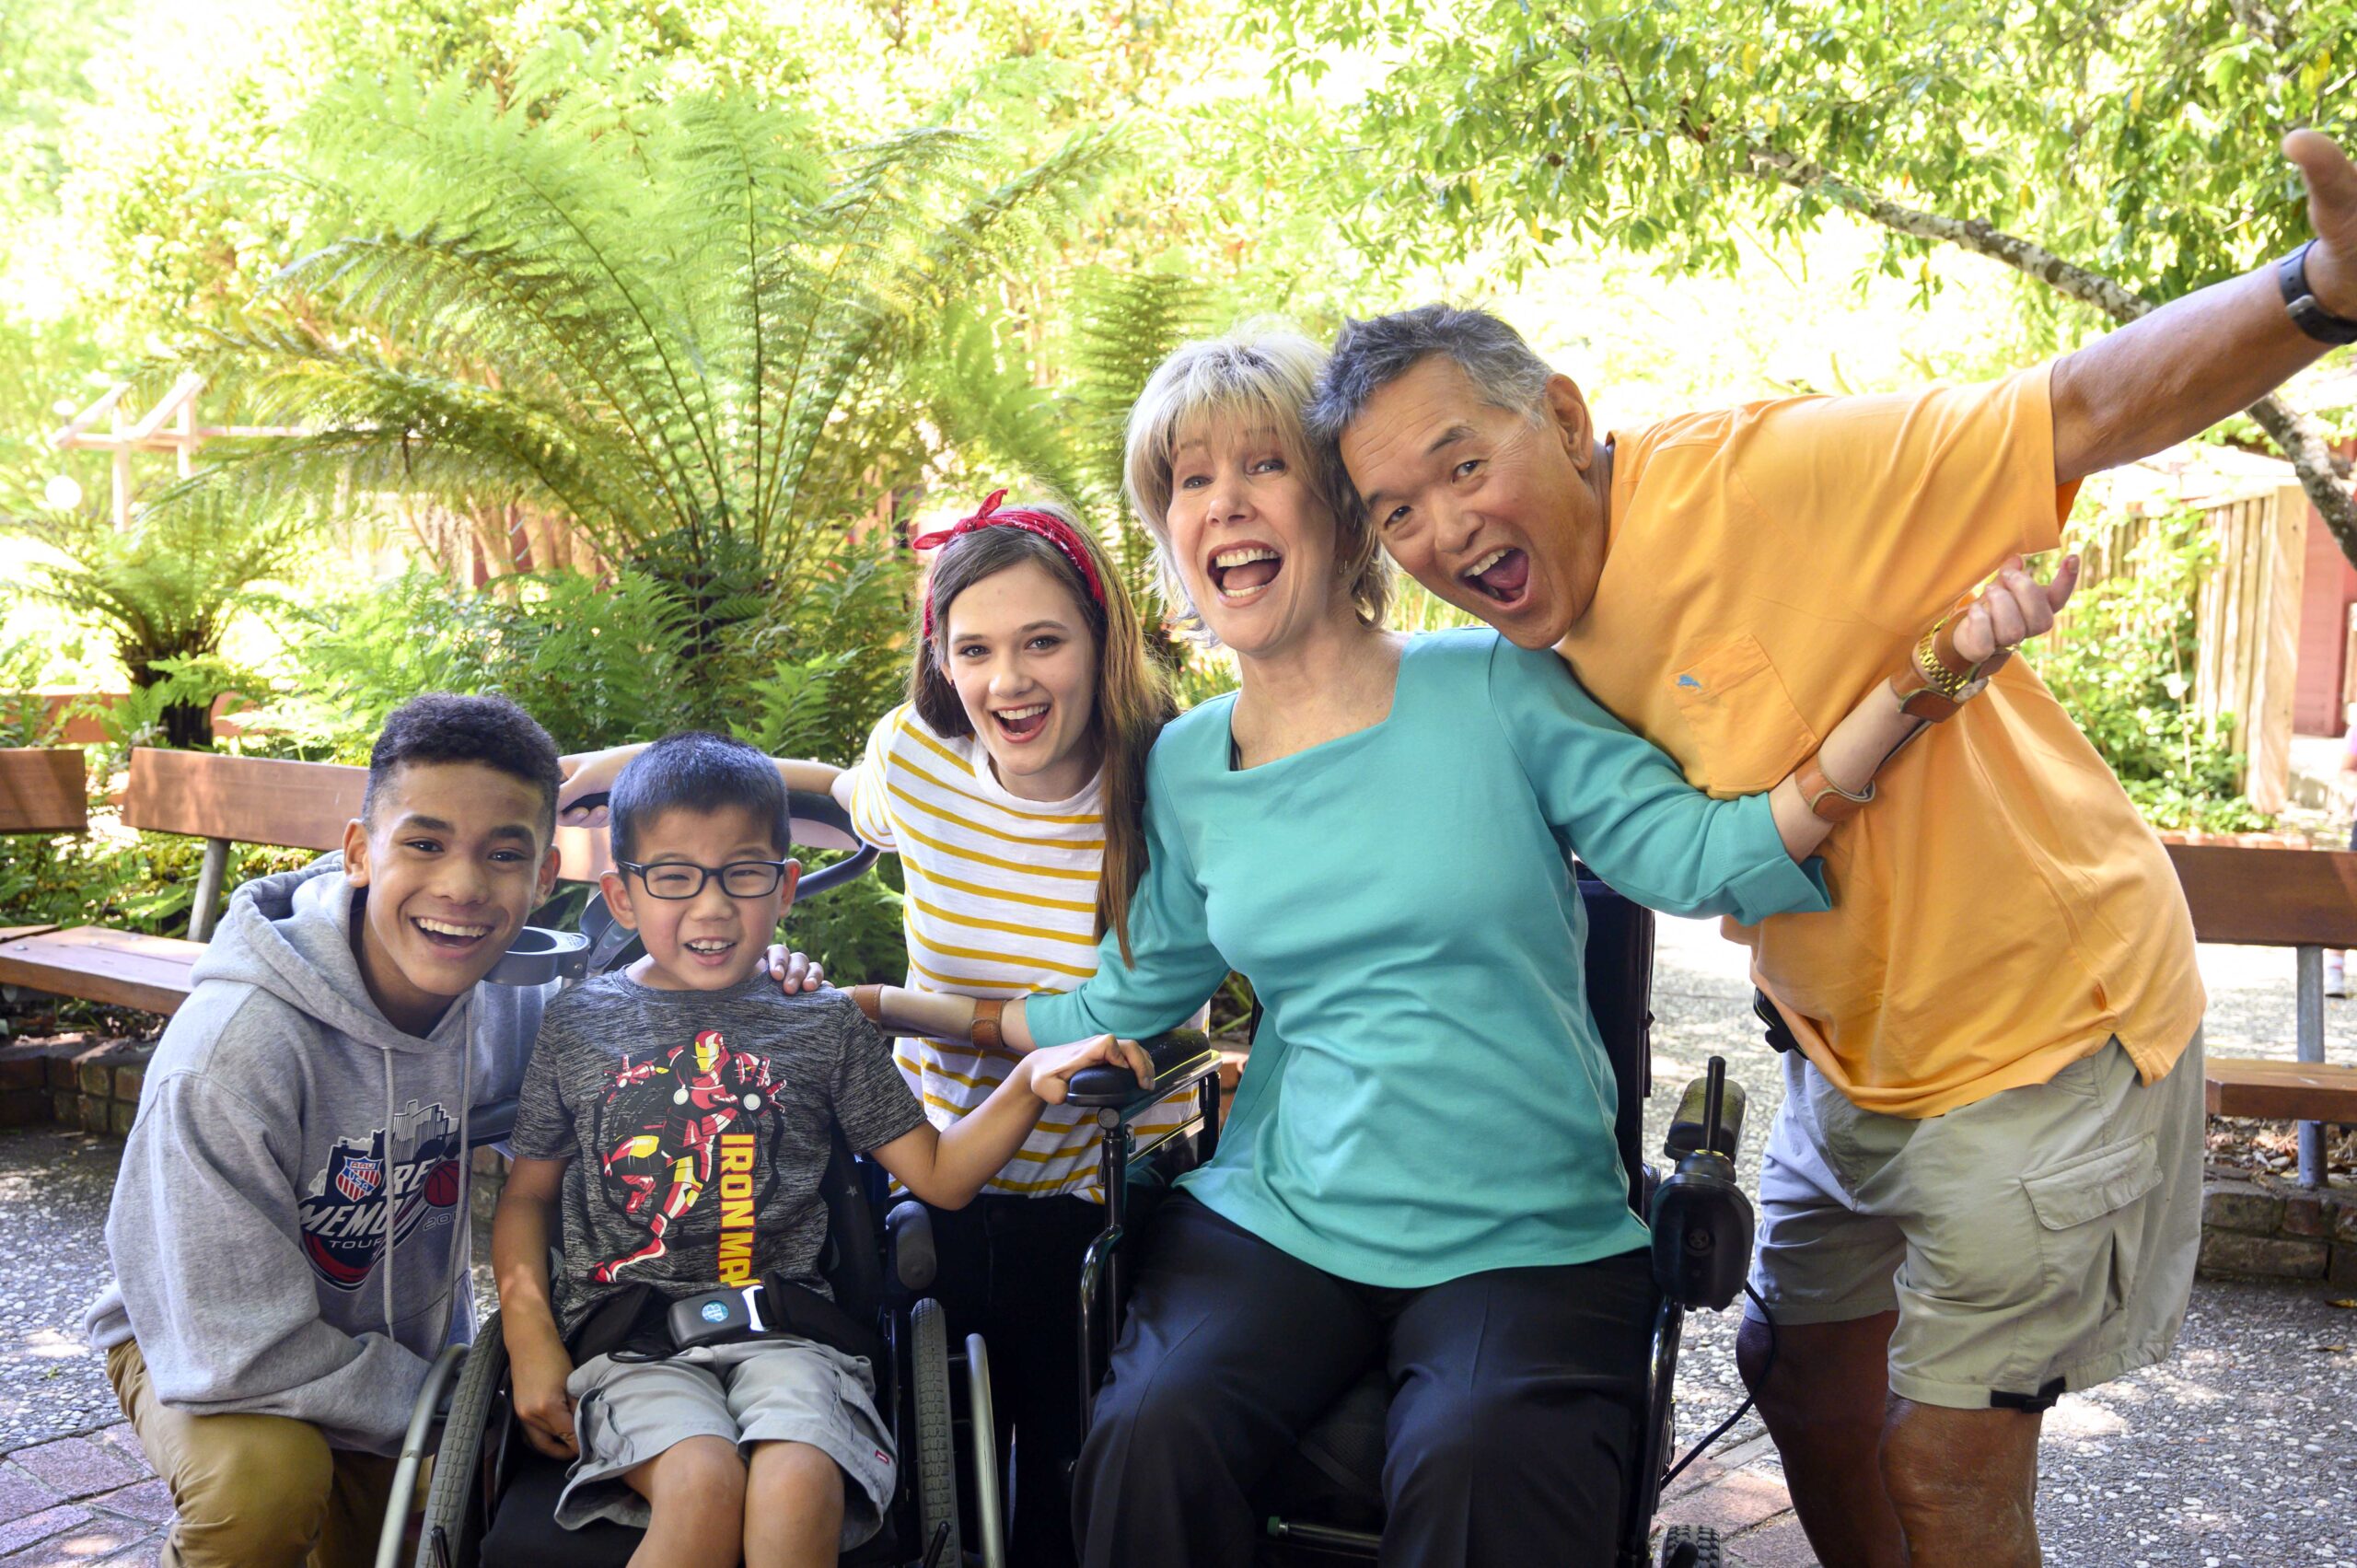 A group photo of Joni, Ken and three children, on who is seated in a wheelchair, the other two on either side of him.